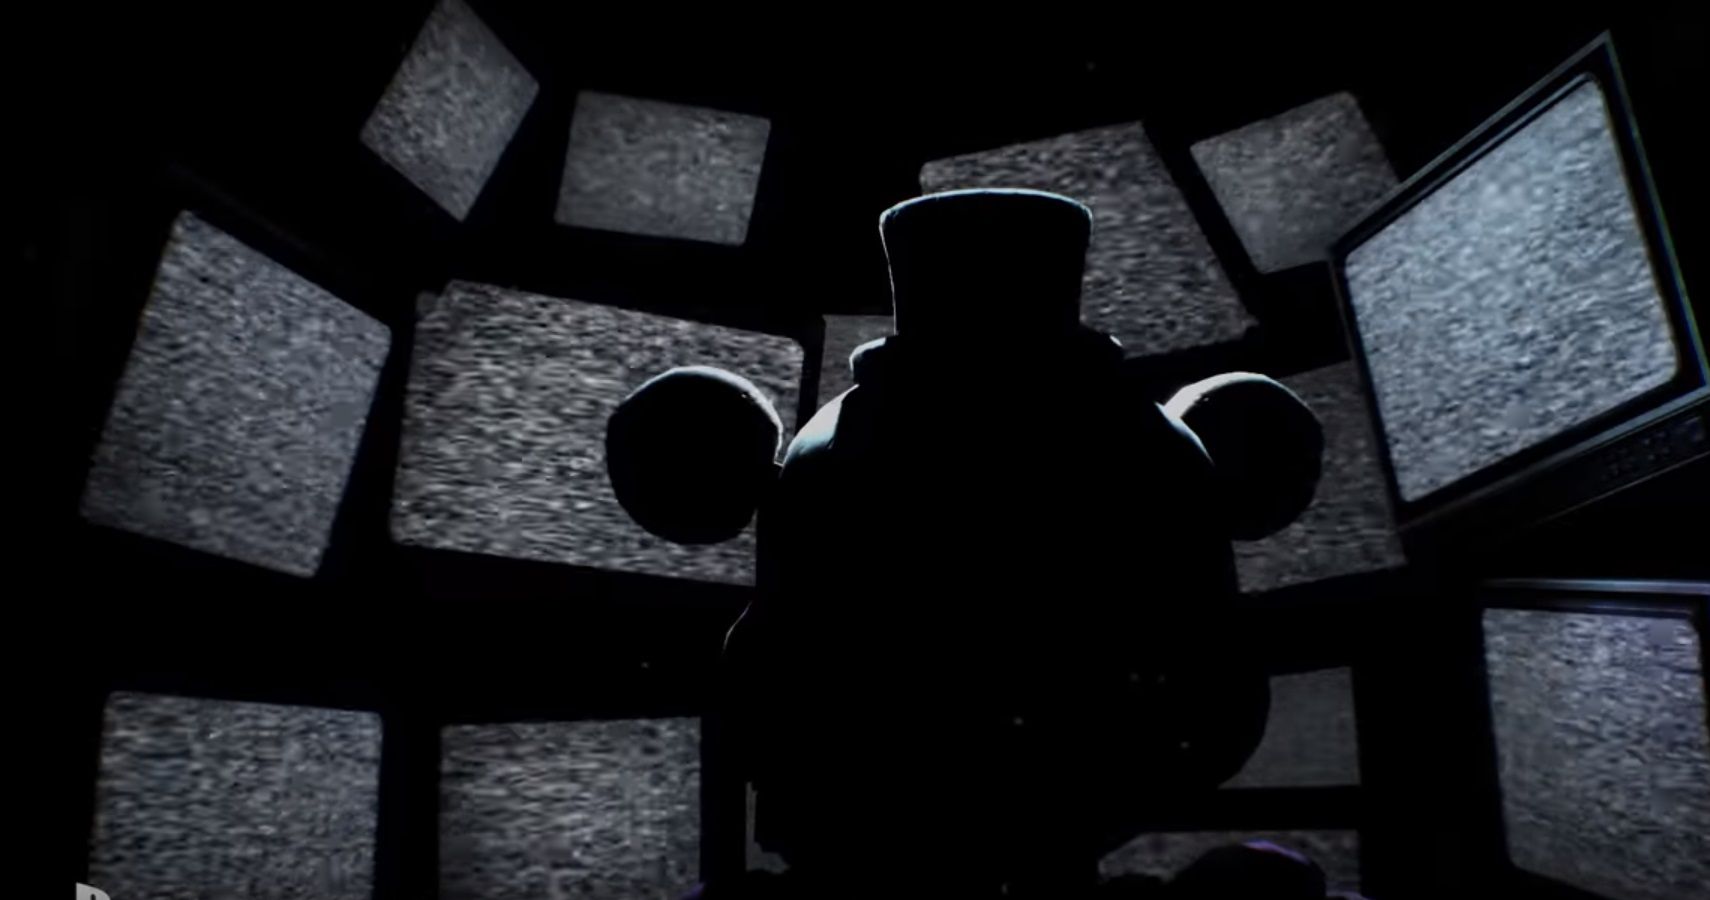 Five Nights At Freddys Rises From The Dead As A PlayStation VR Game